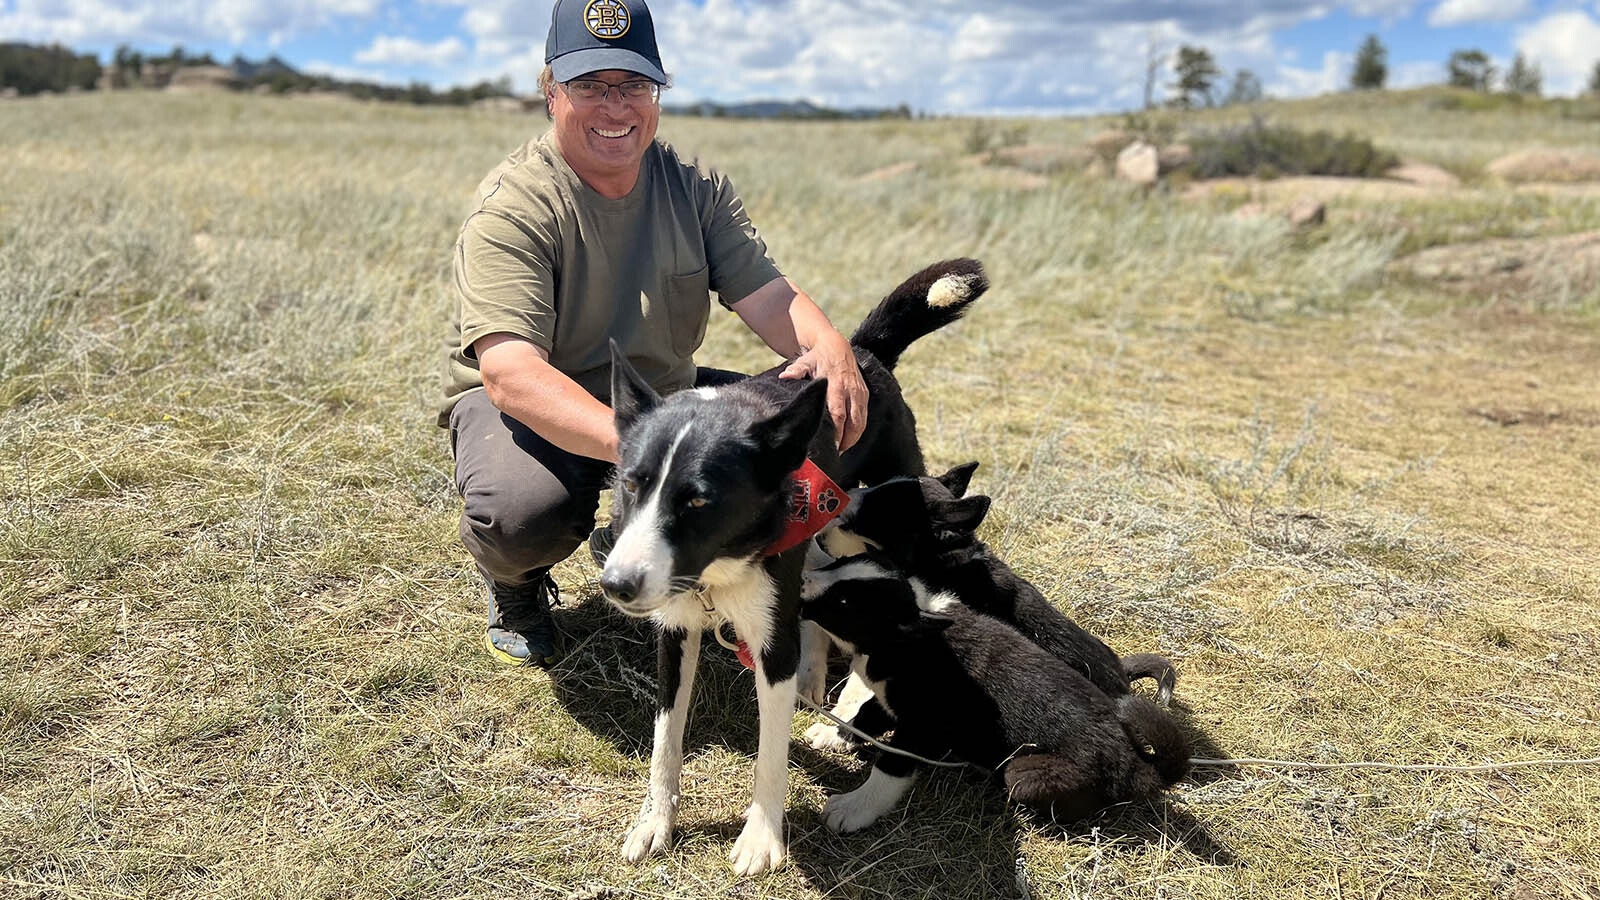 Jenna Bourgeois of Big Timber, Montana breeds Karelian Bear Dogs. He likes to camp at Vedauwoo in Wyoming, where there’s plenty of space for the energetic dogs.